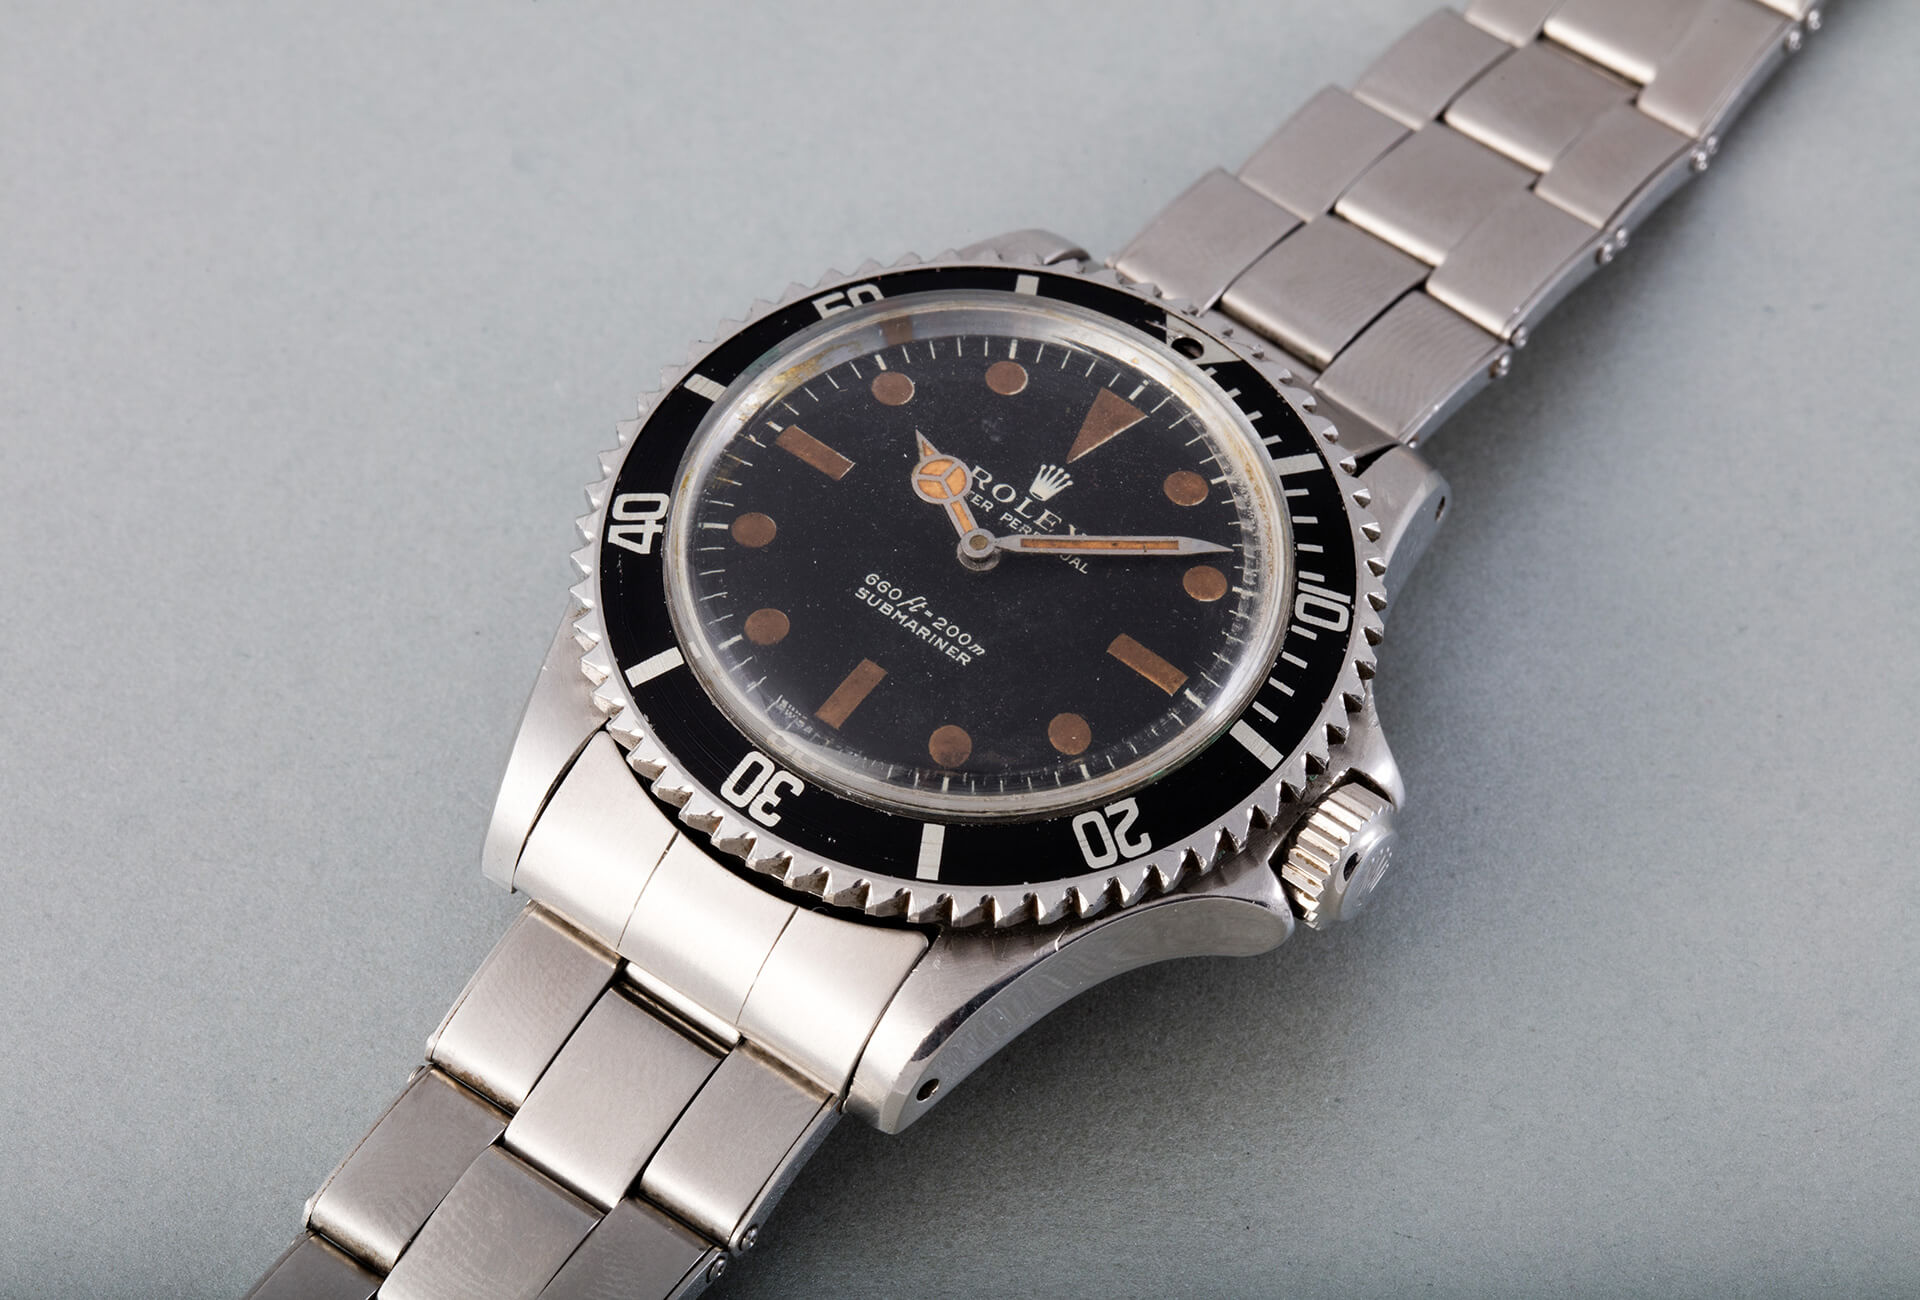 Rolex Submariner: Is the world's most 